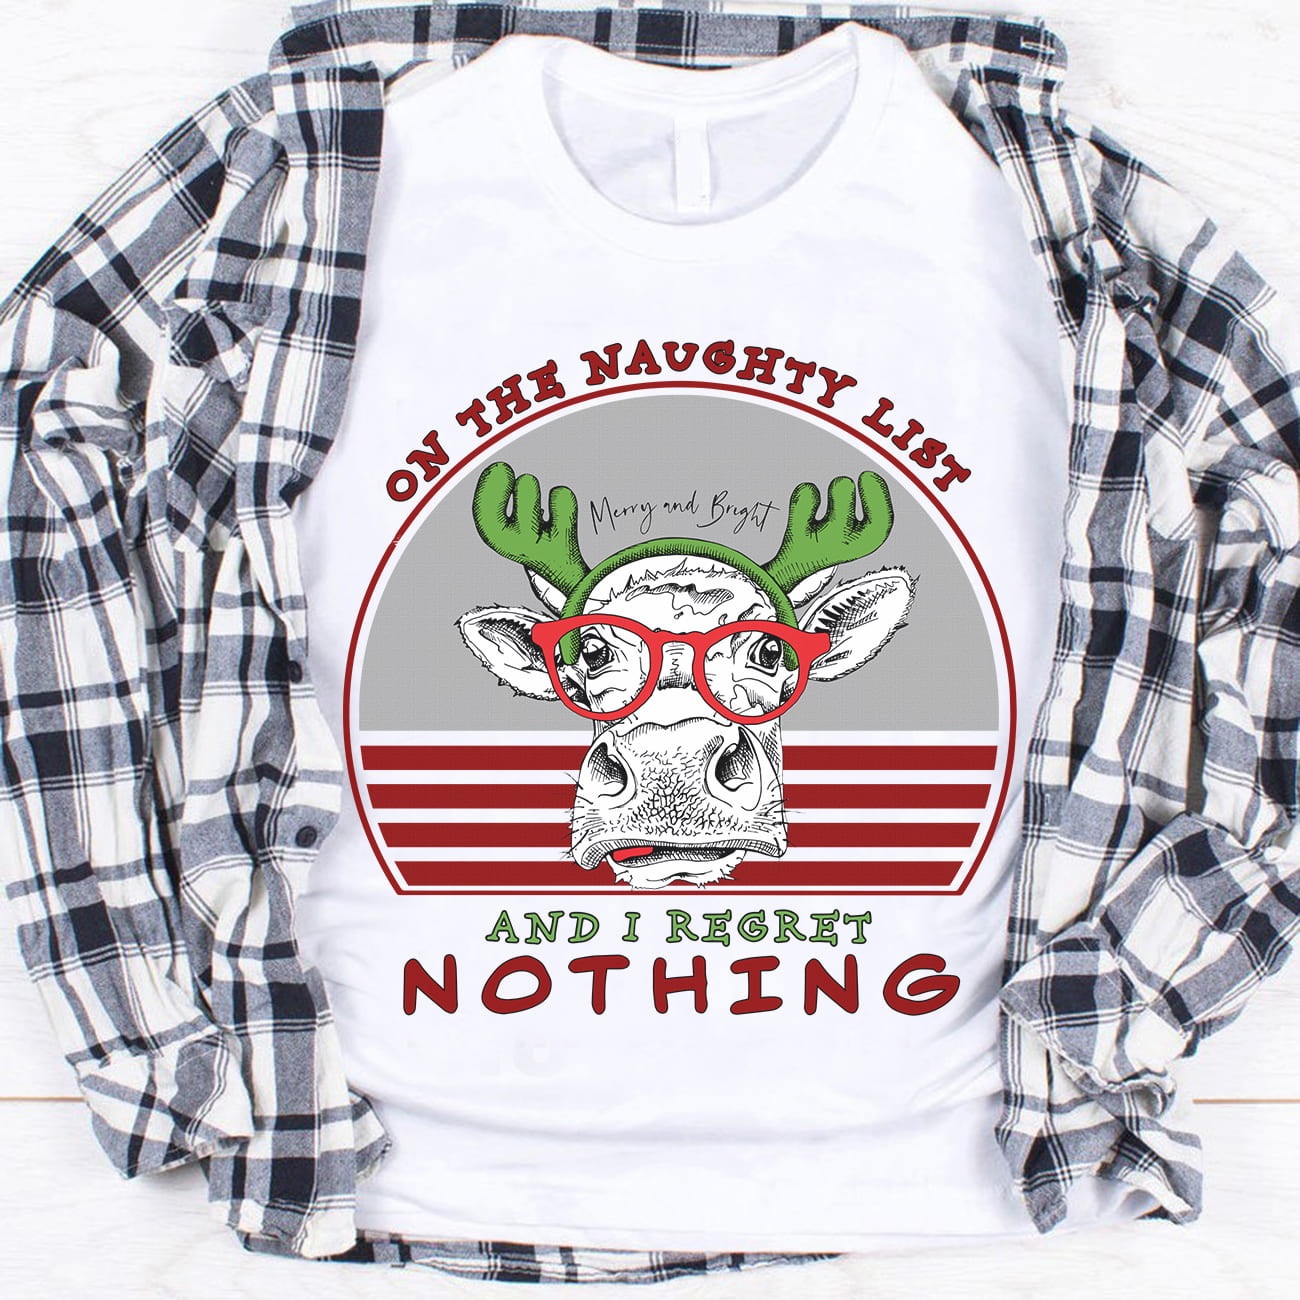 On the naughty list and I regret nothing - Funny cow graphic T-shirt, Merry and Bright, Santa Claus naughty list